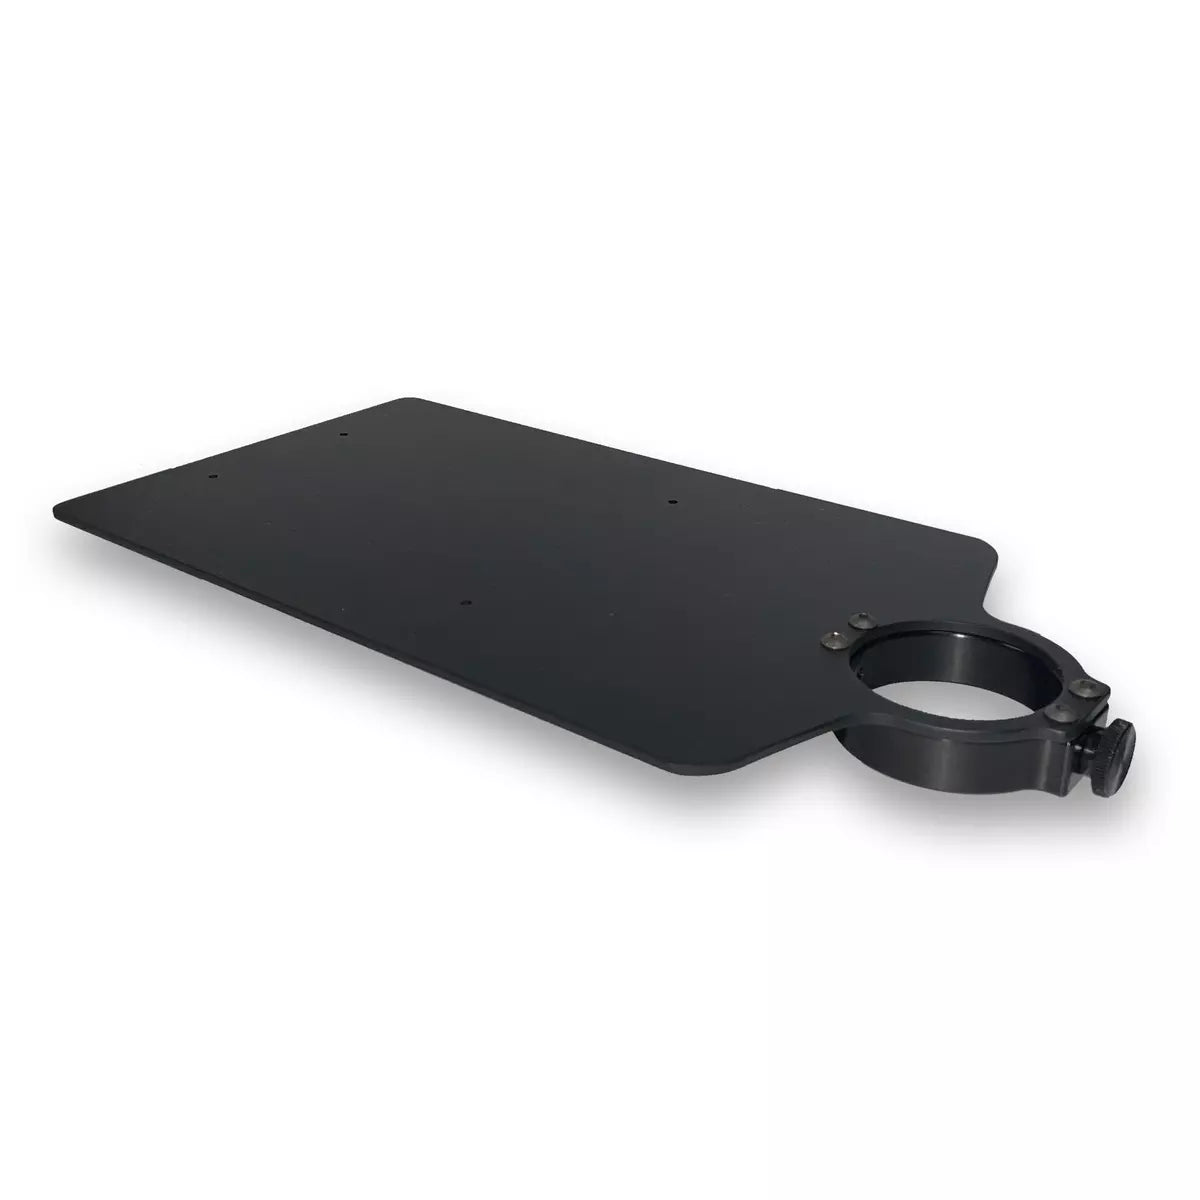 Durable black aluminum construction shelf holds small accessories up to 5 lb. 